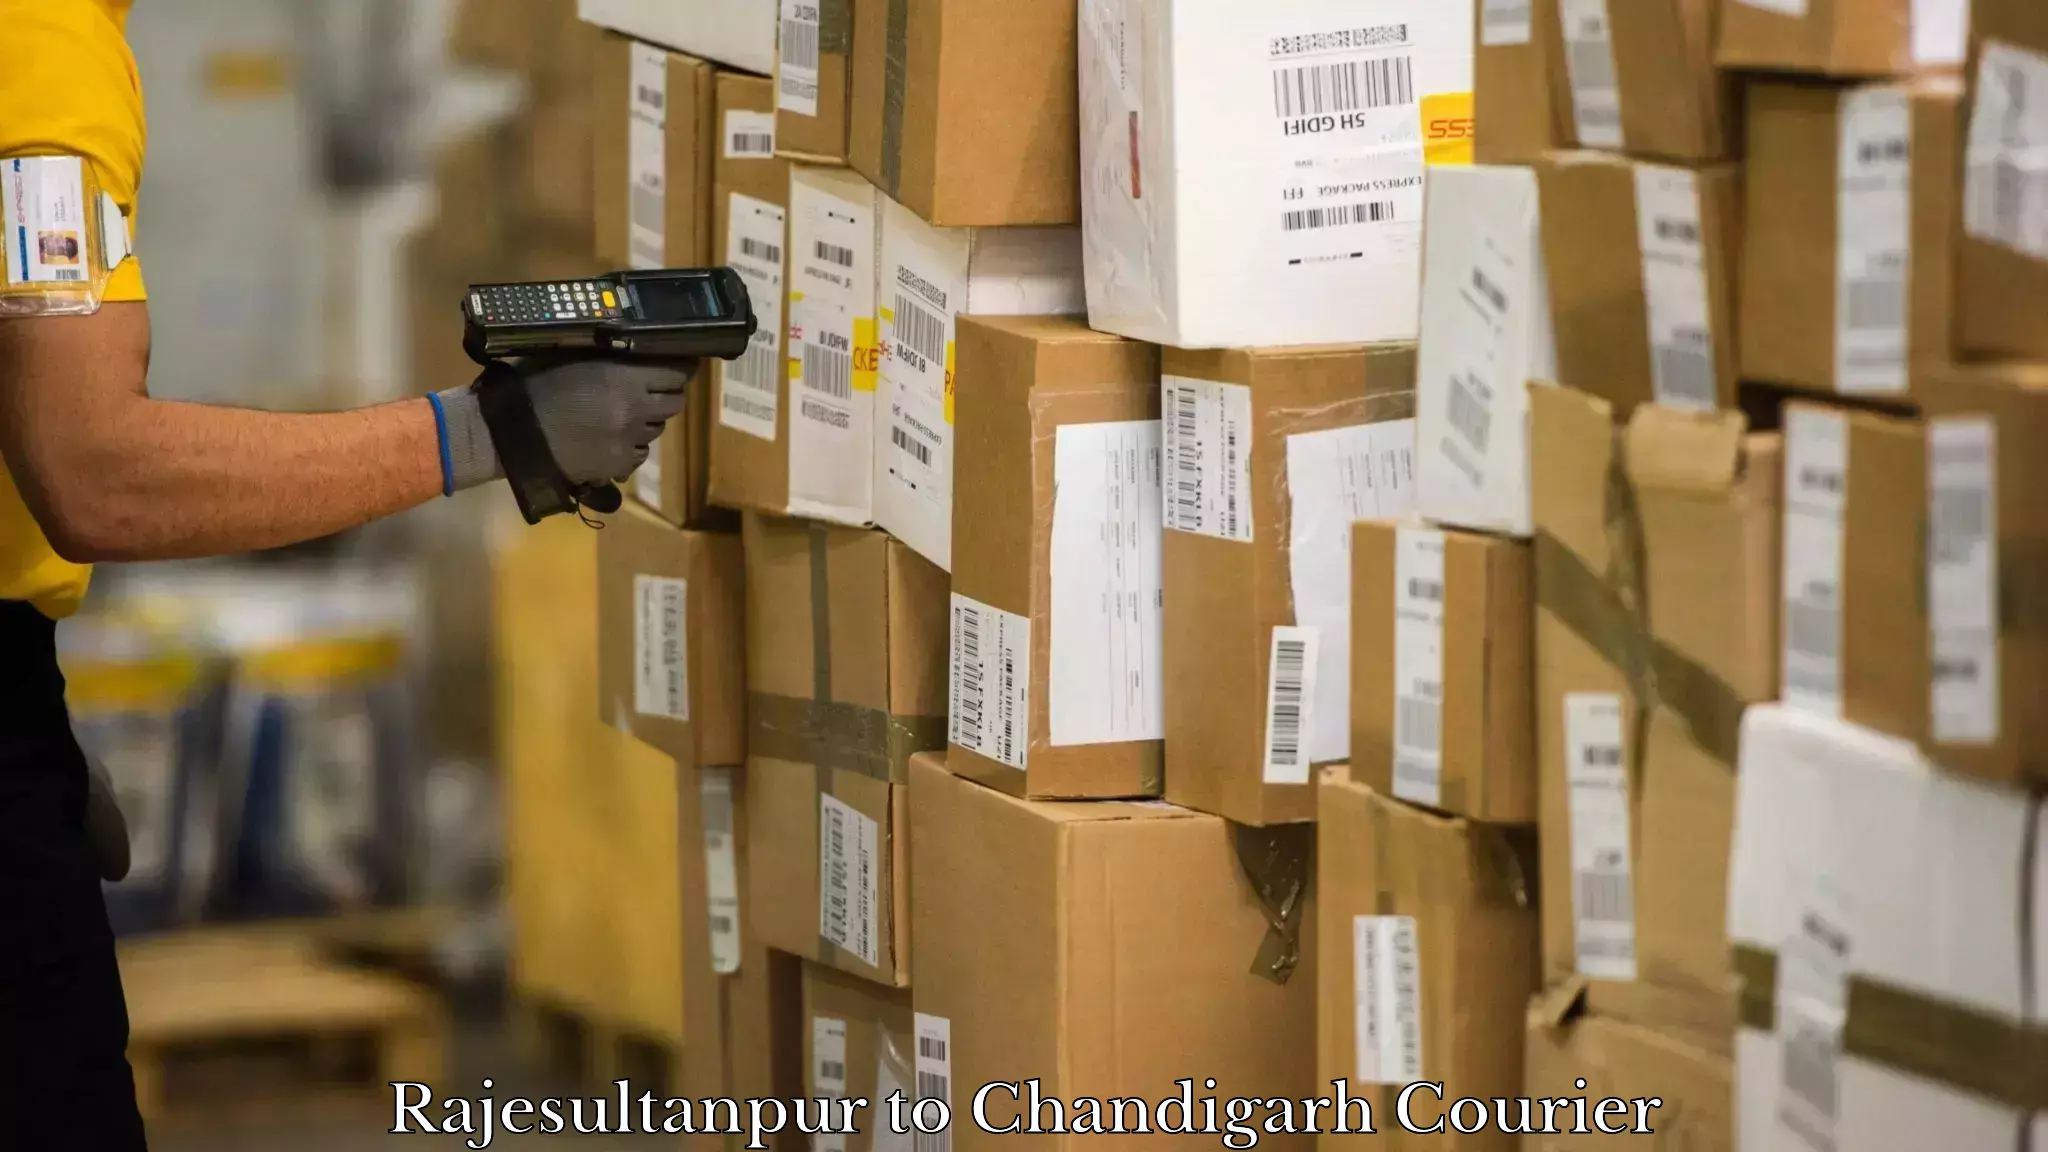 E-commerce logistics support Rajesultanpur to Chandigarh